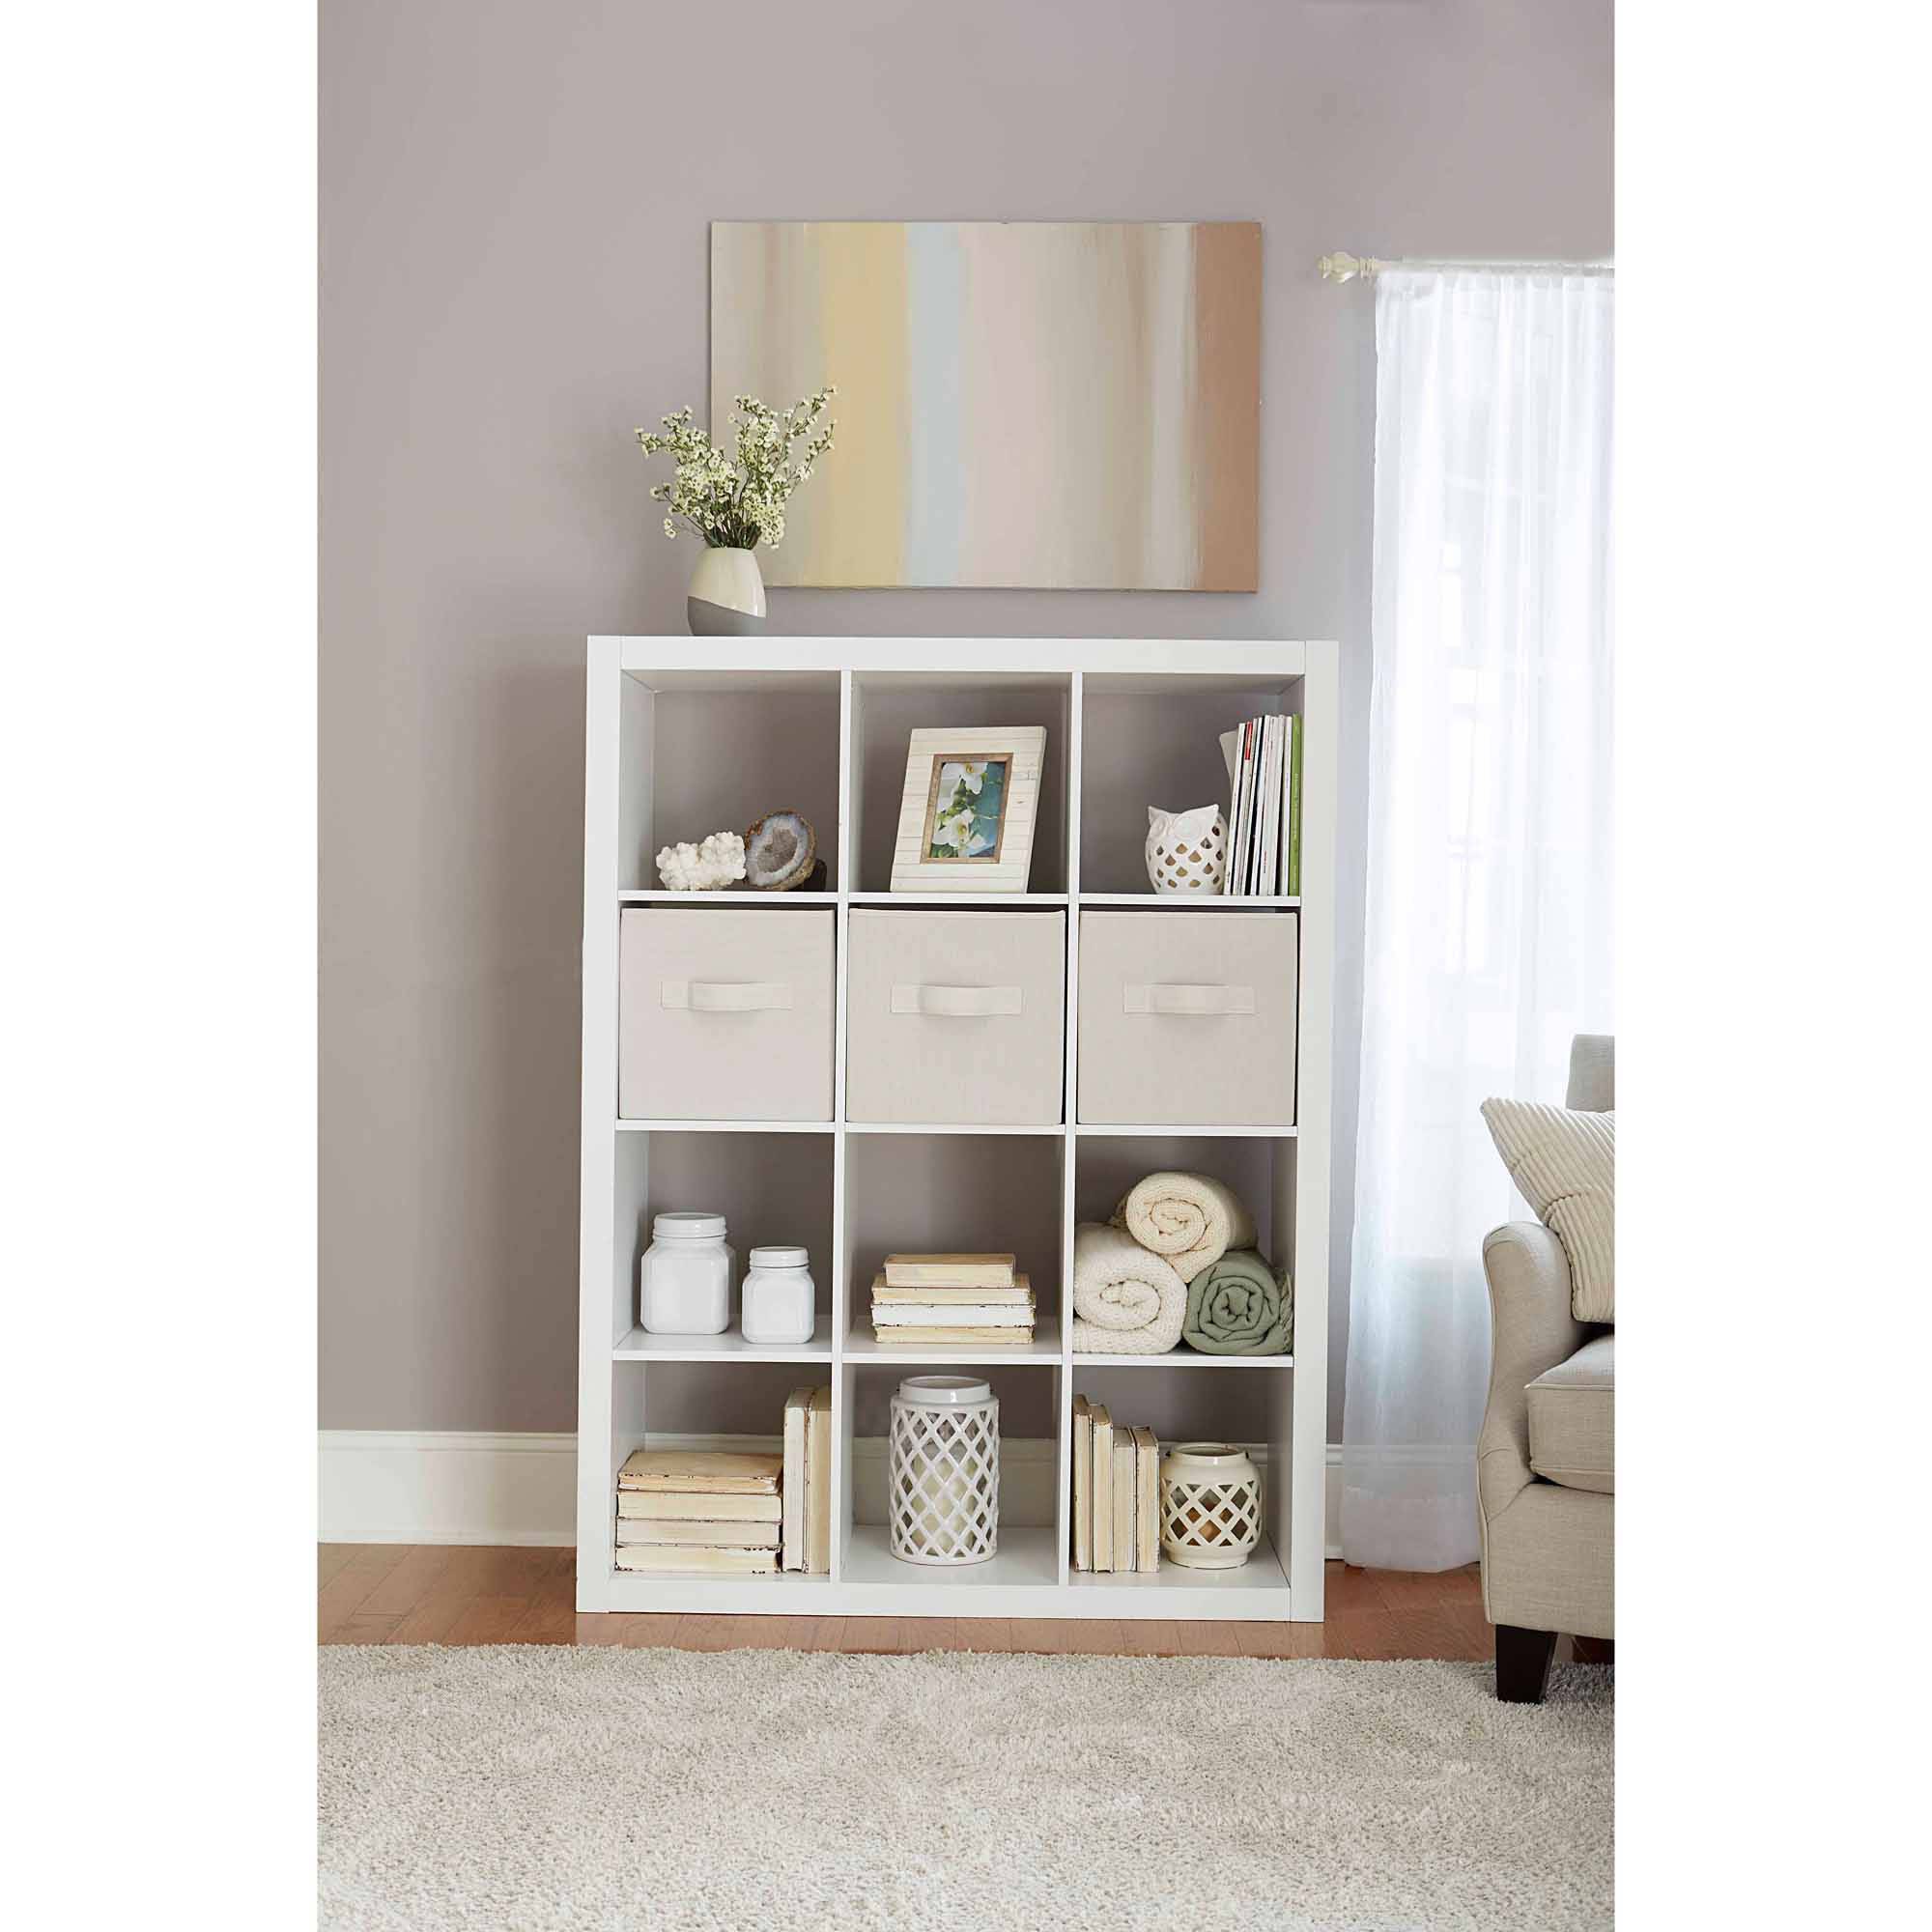 Better Homes and Gardens 12 Cube Storage Organizer, Multiple Colors - image 5 of 6